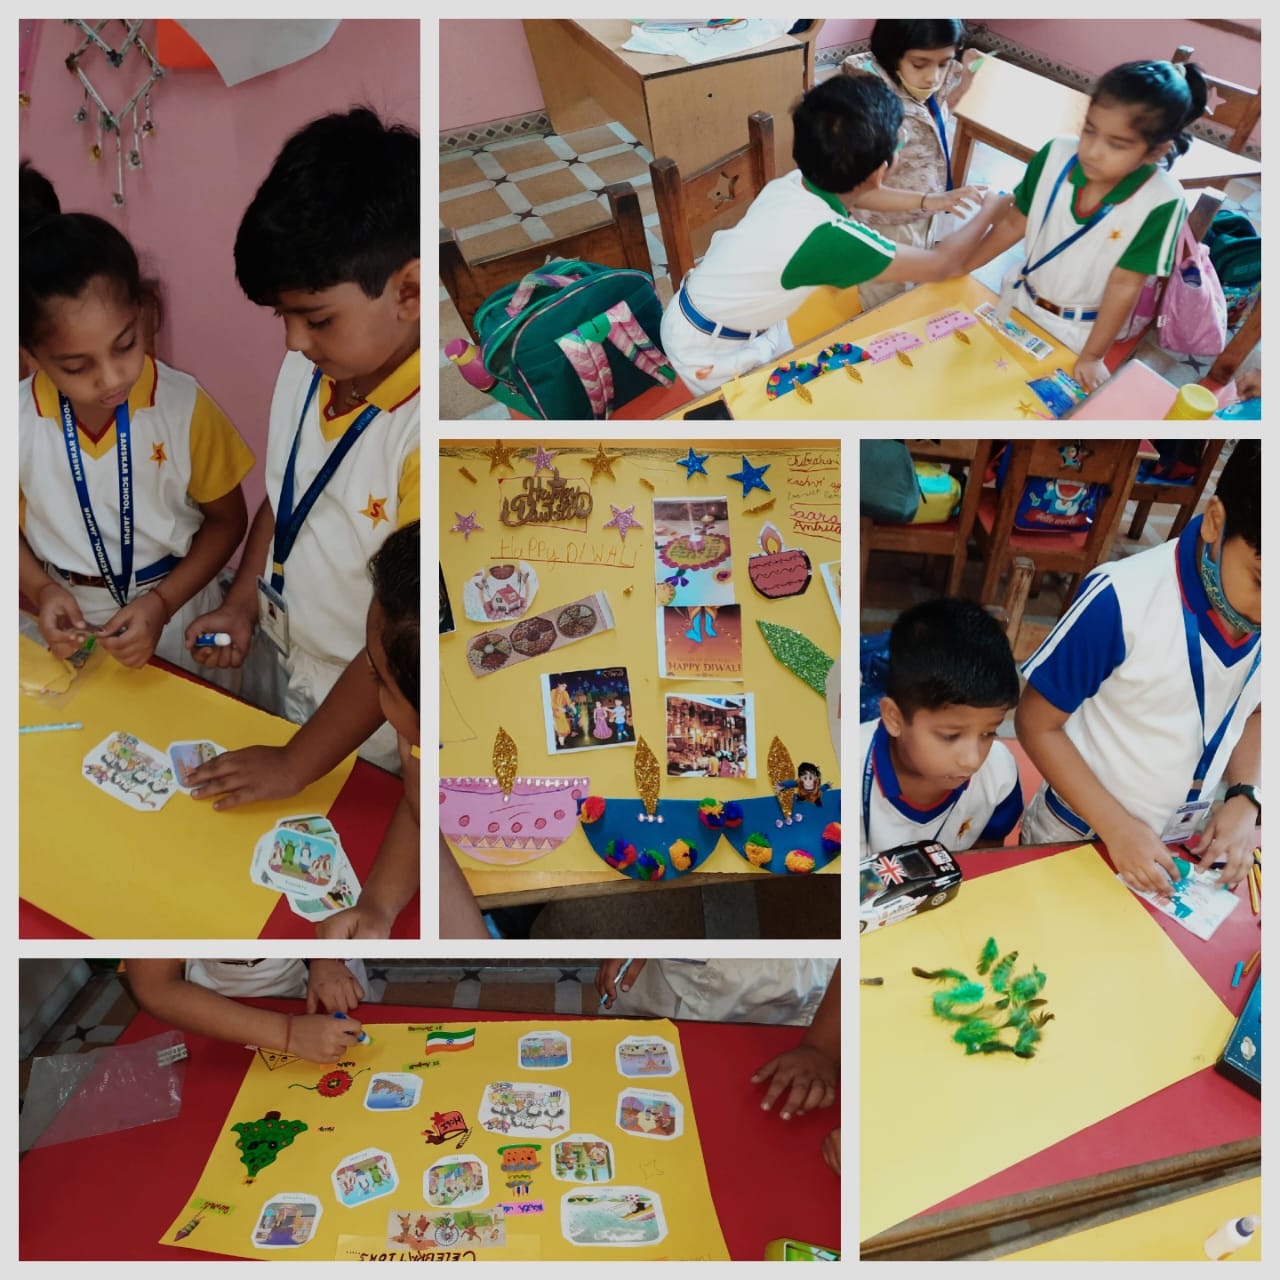 Inter House Collage Making Competition